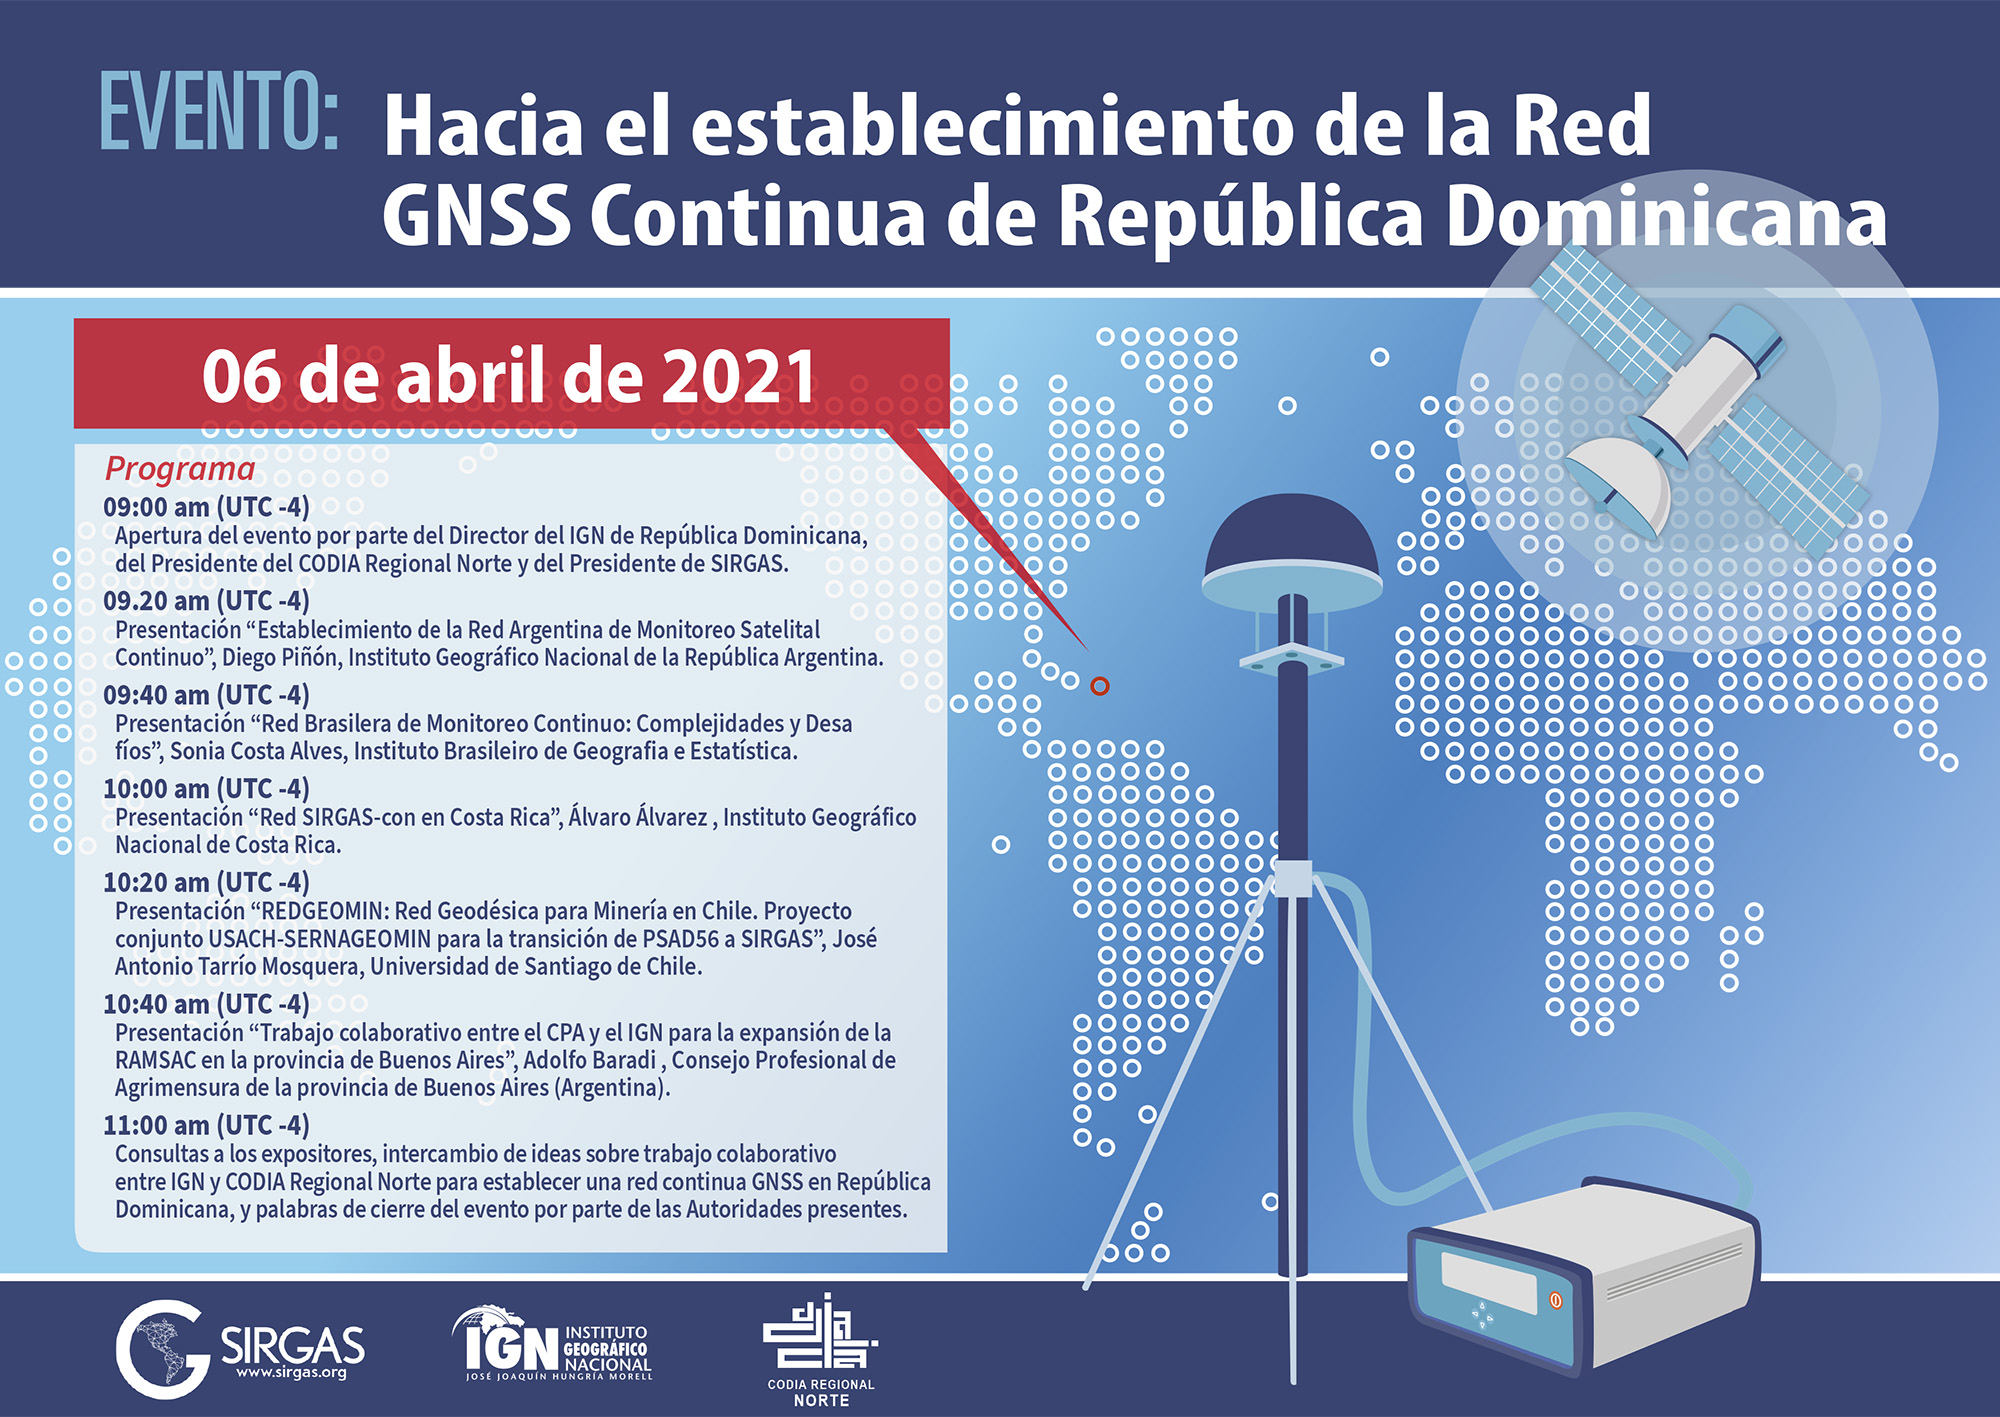 Event: Towards the establishment of the Continuous GNSS Network of the Dominican Republic